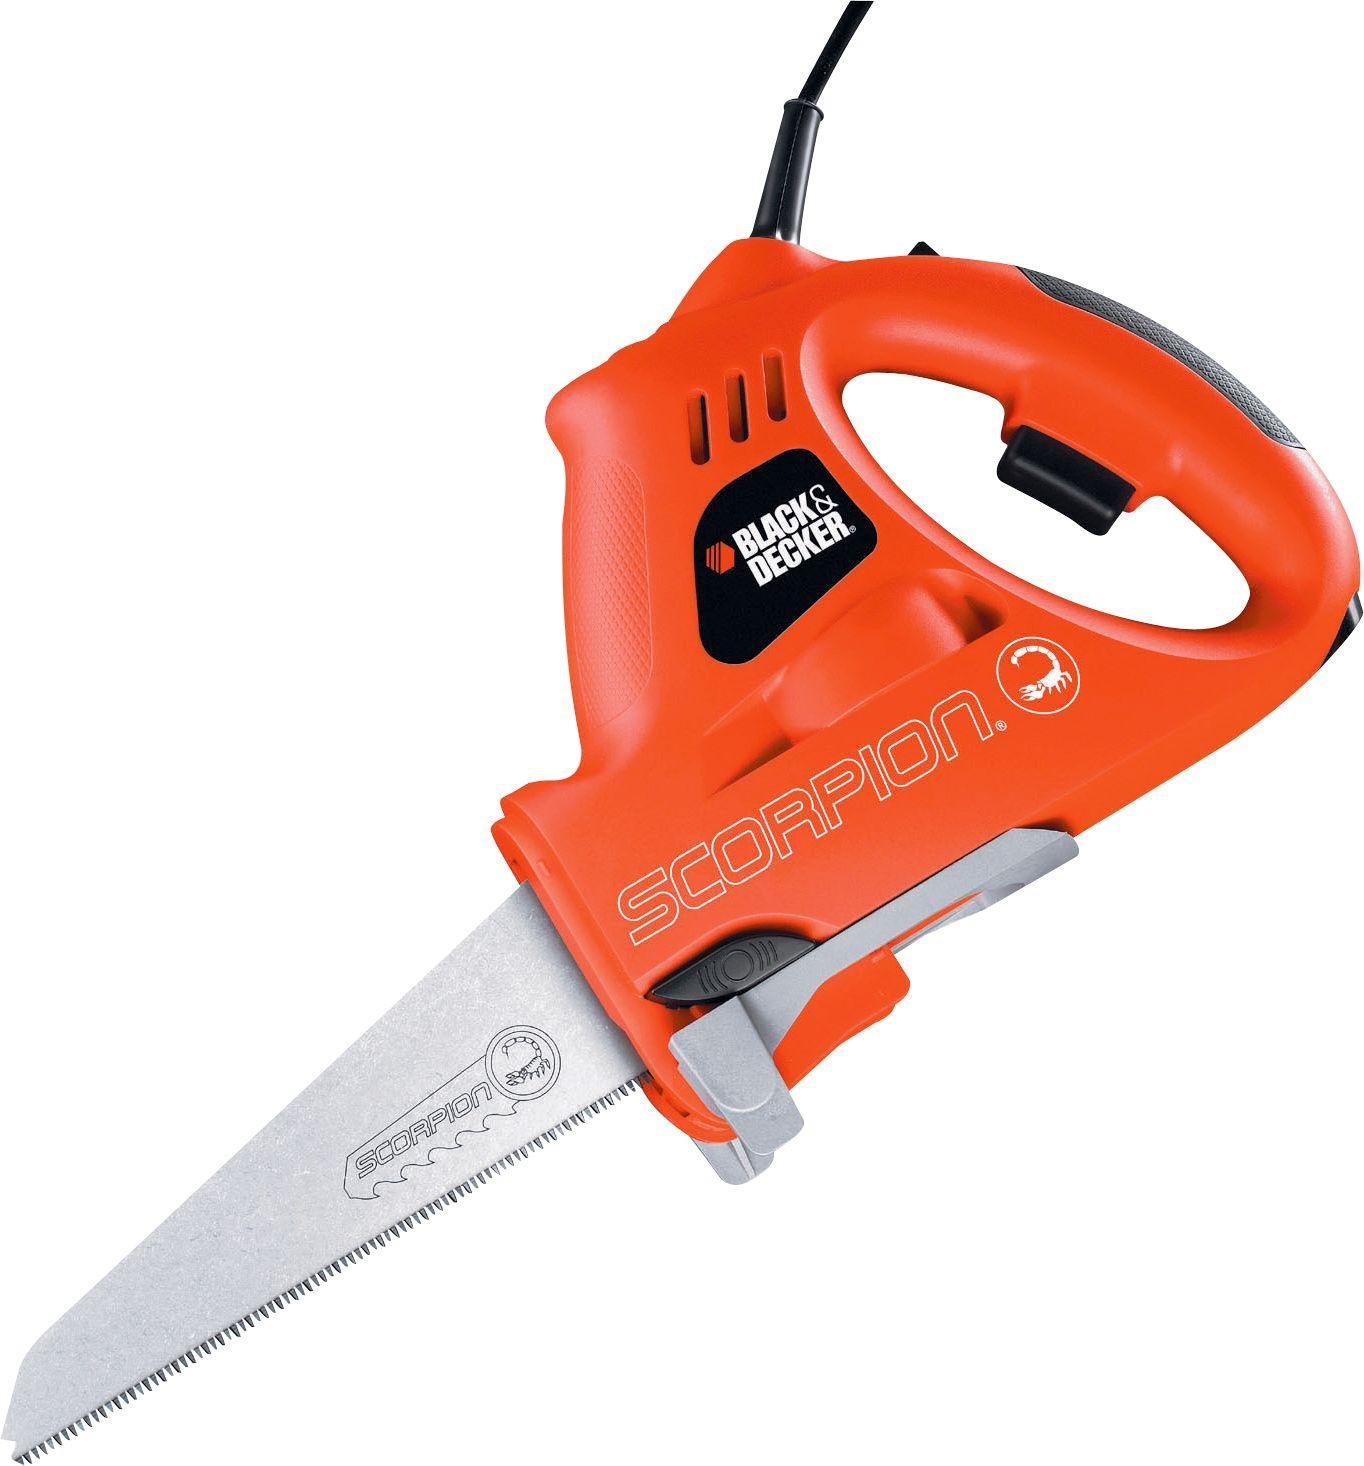 Black And Decker Scorpion Multifunction Reciprocating Saw 400w 230v